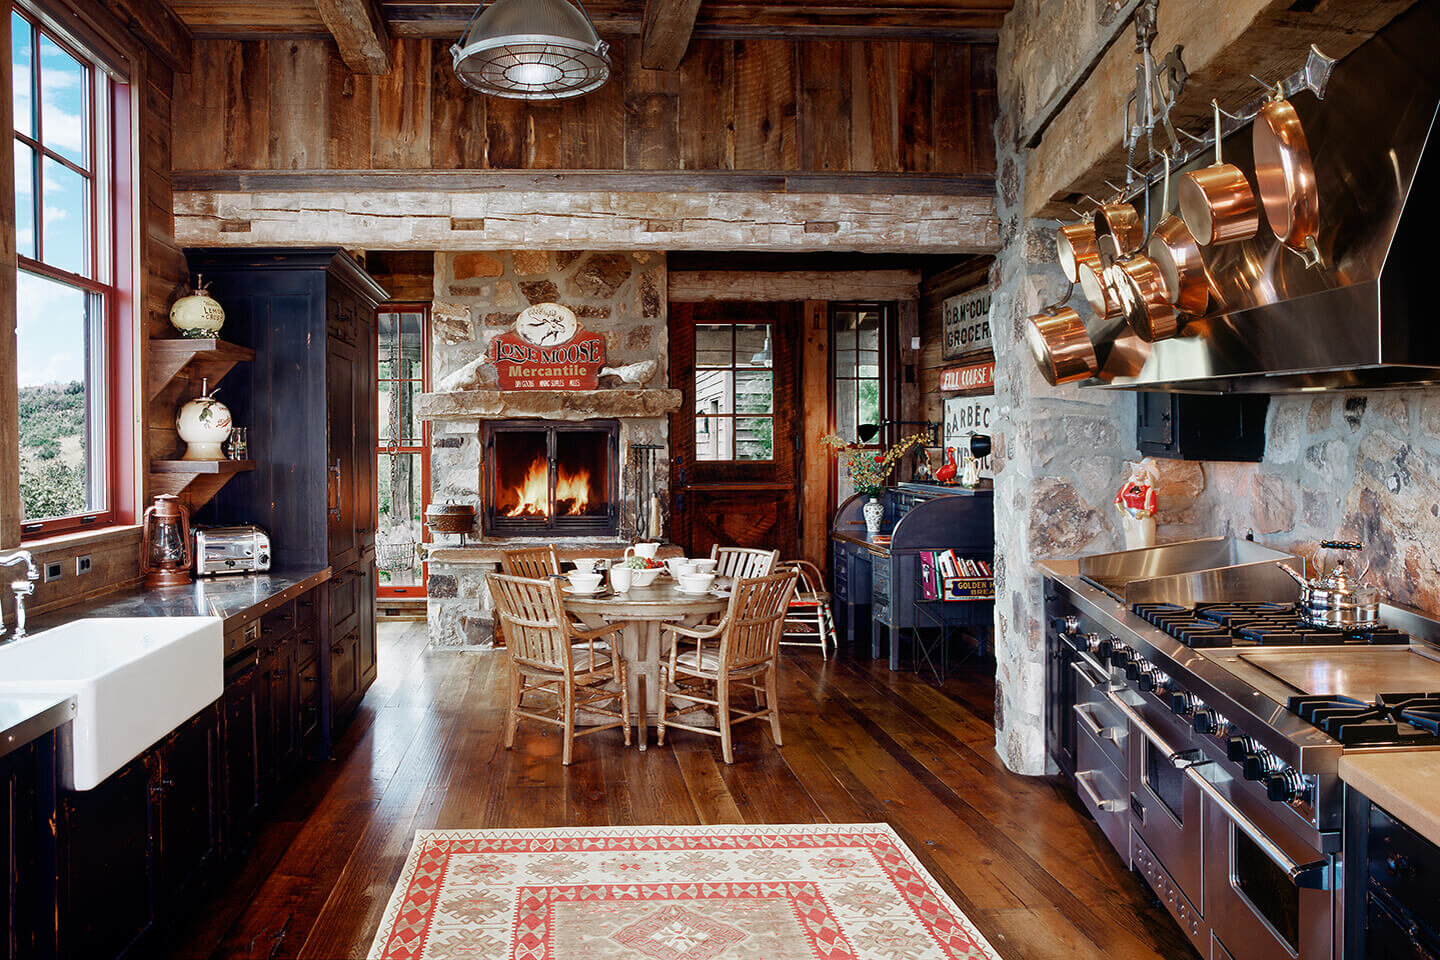 Rustic kitchen with steel appliances